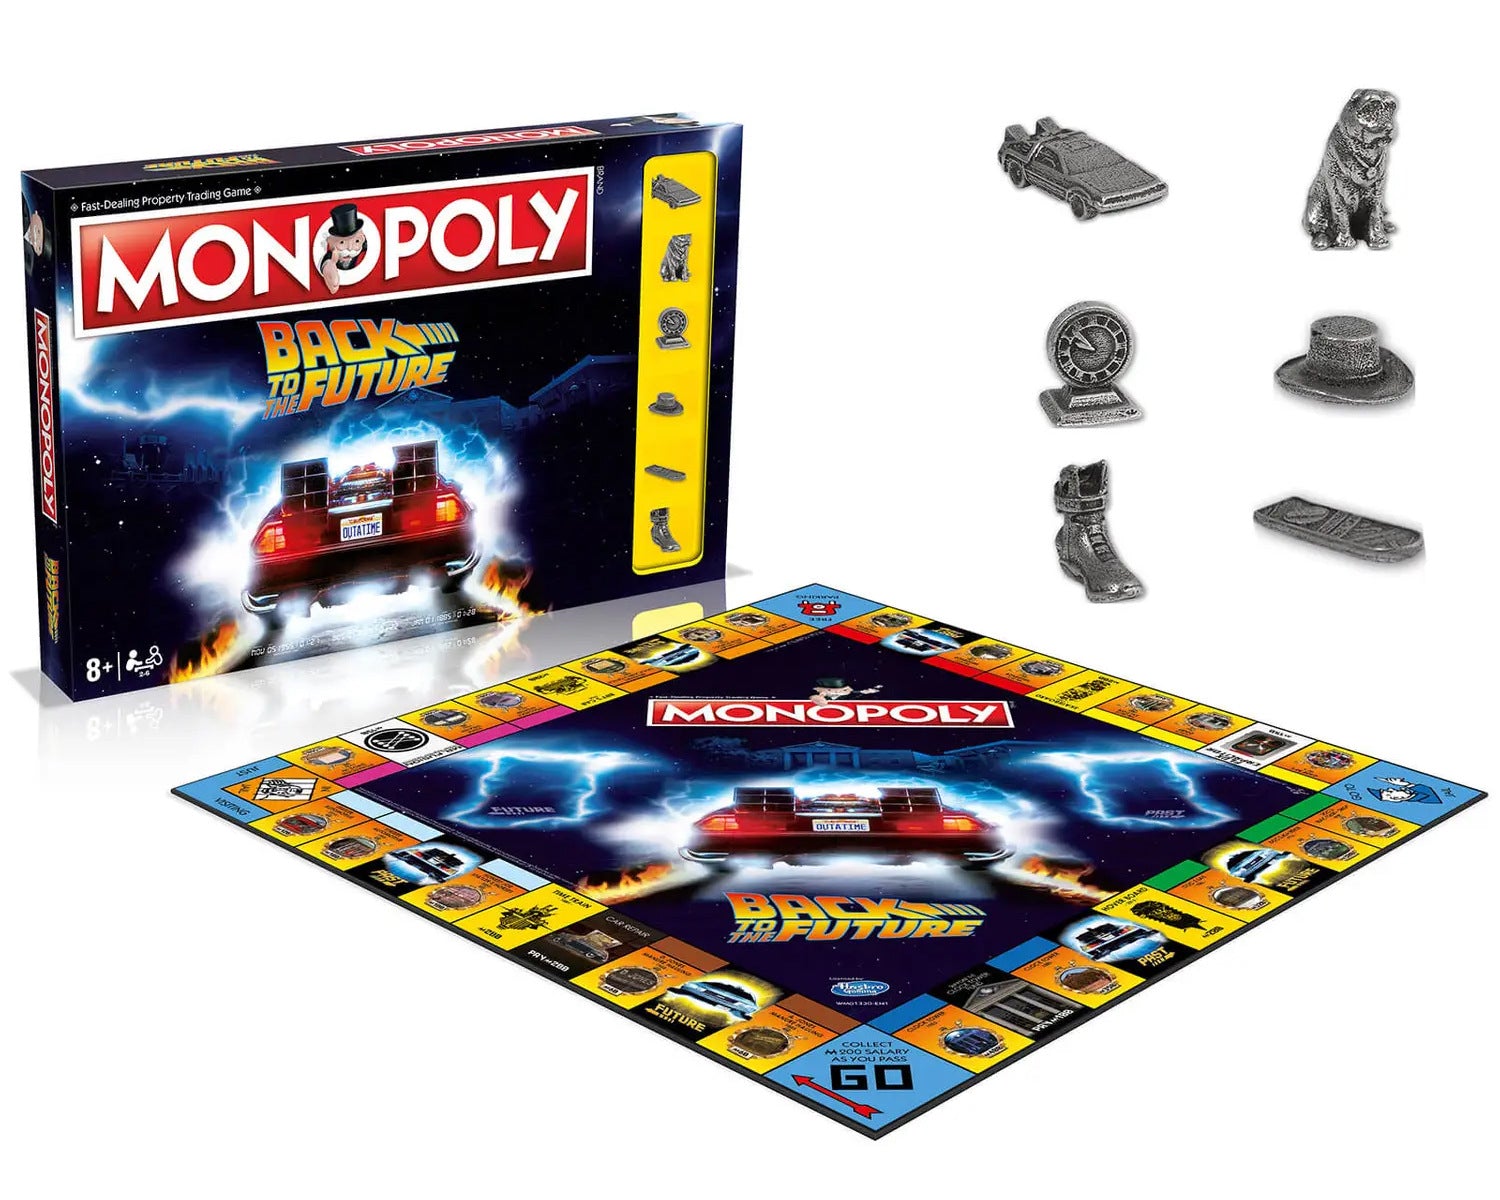 BACK TO THE FUTURE MONOPOLY